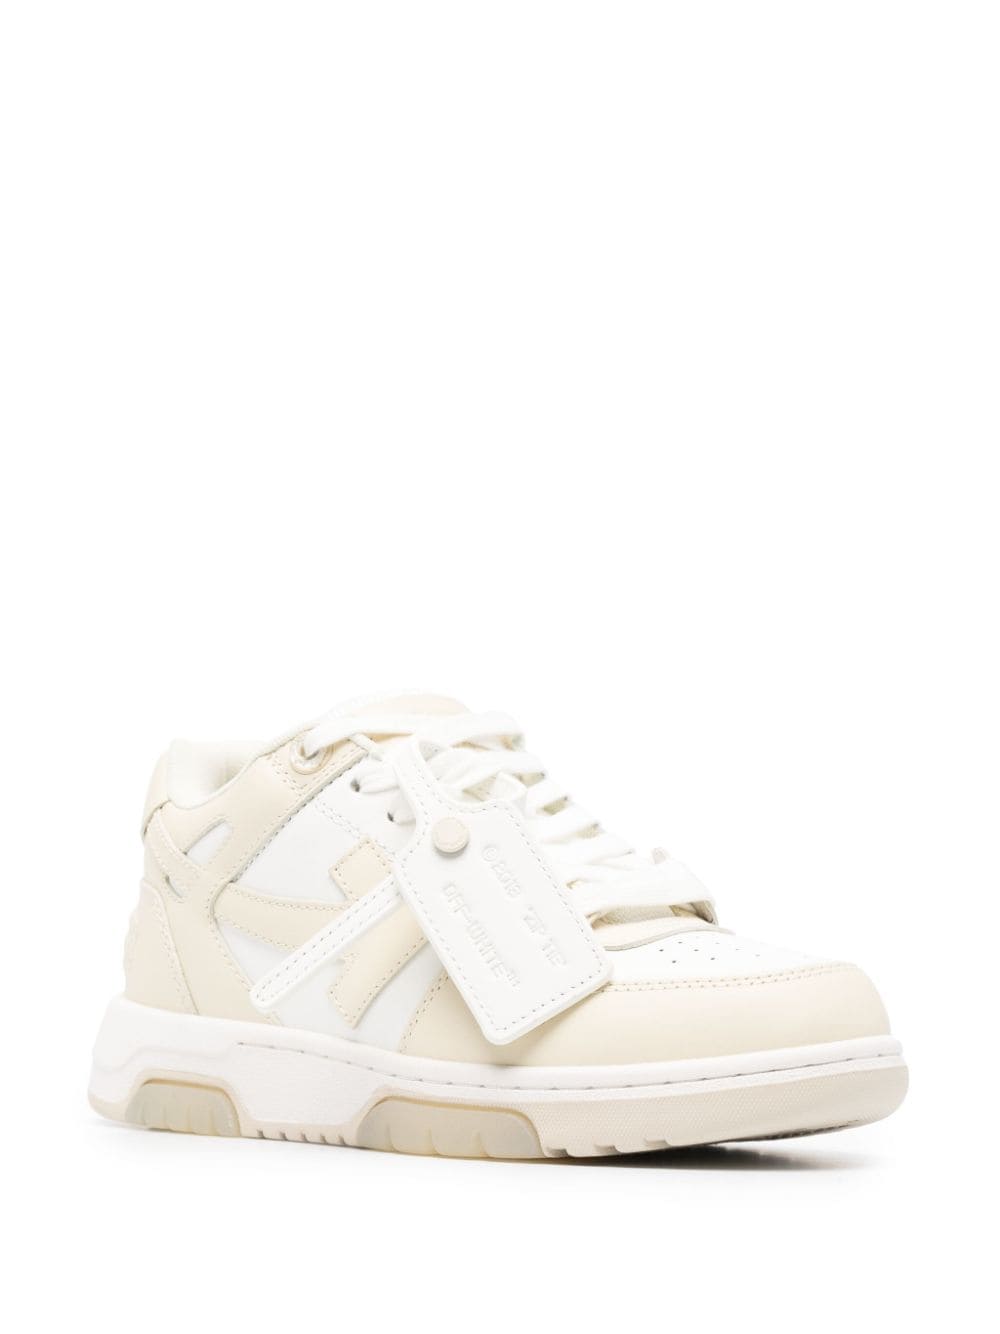 Off-White Out Of Office 'OOO' sneakers